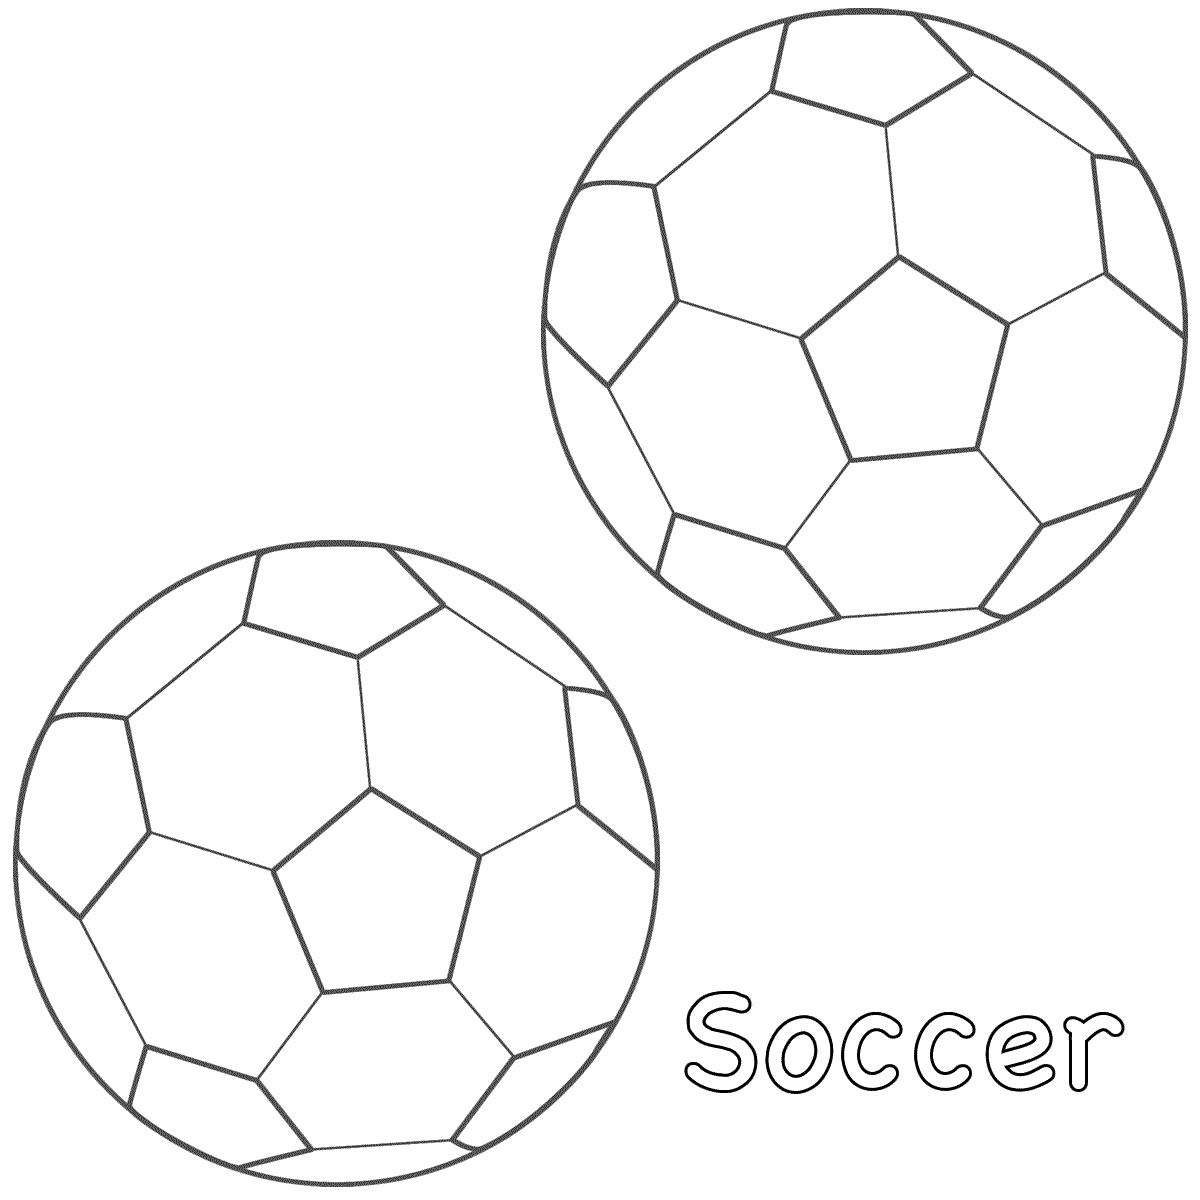 free-sports-ball-coloring-pages-download-free-sports-ball-coloring